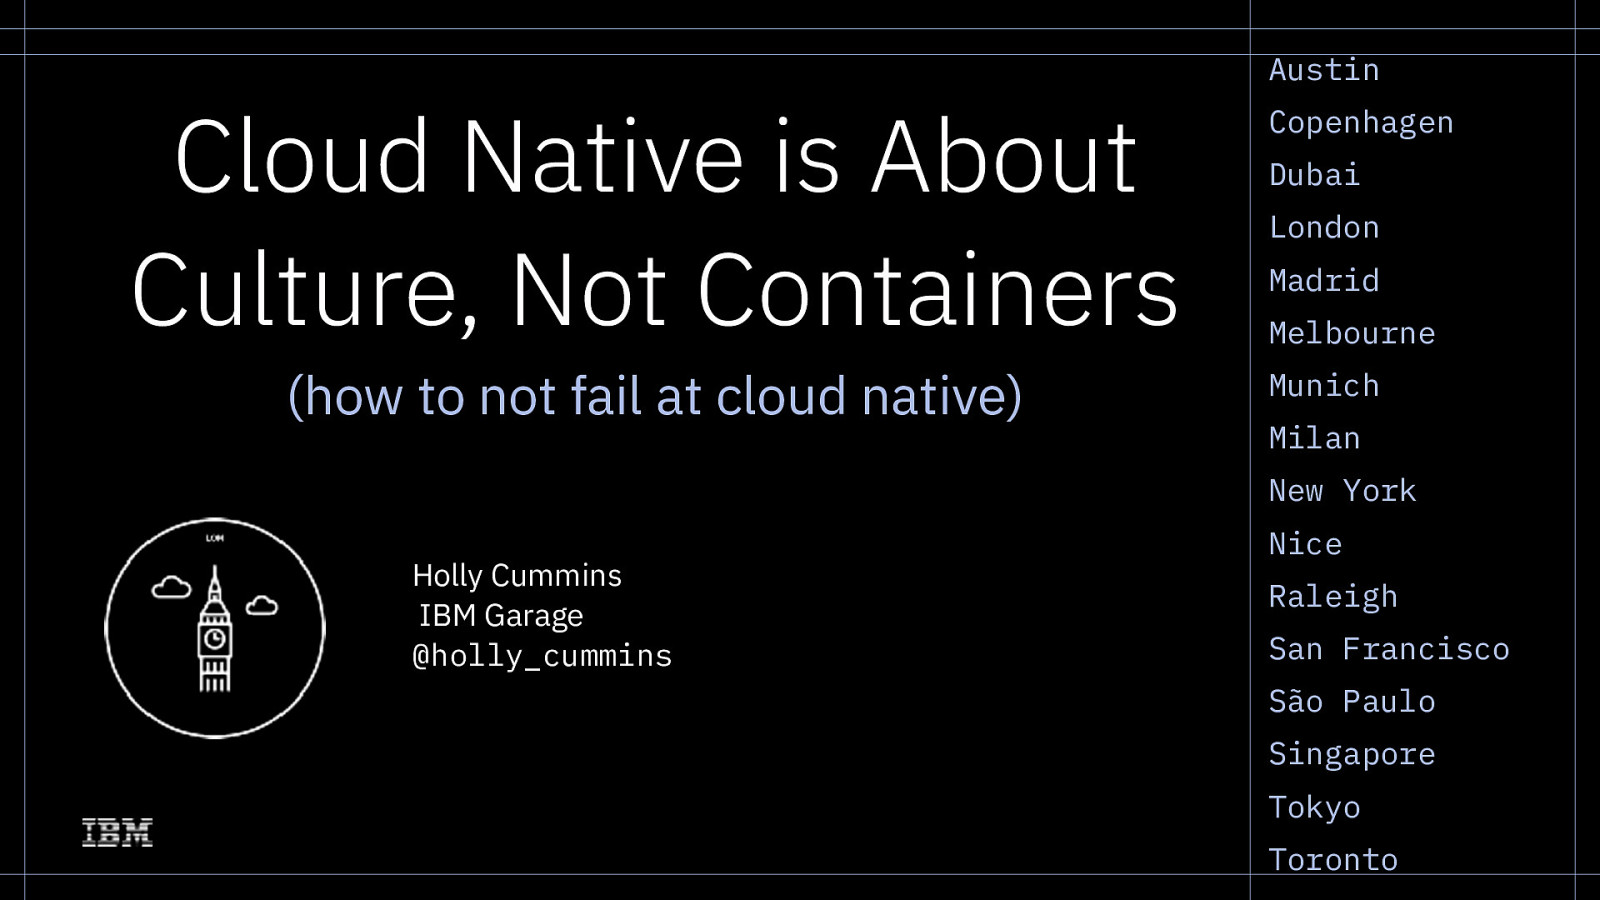 Cloud Native is about Culture, not Containers